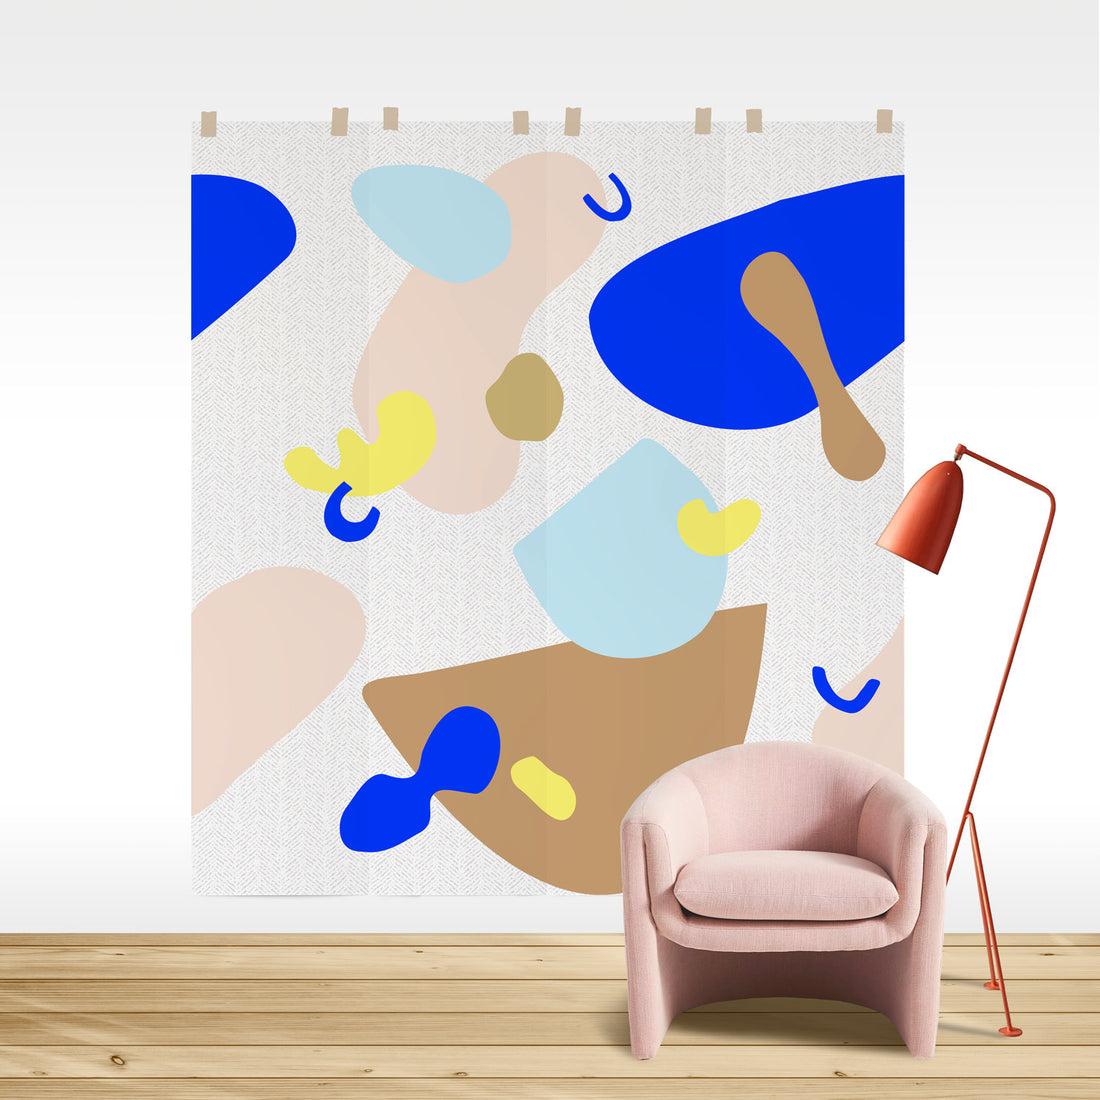 hand painted shapes print wall mural with herringbone pattern